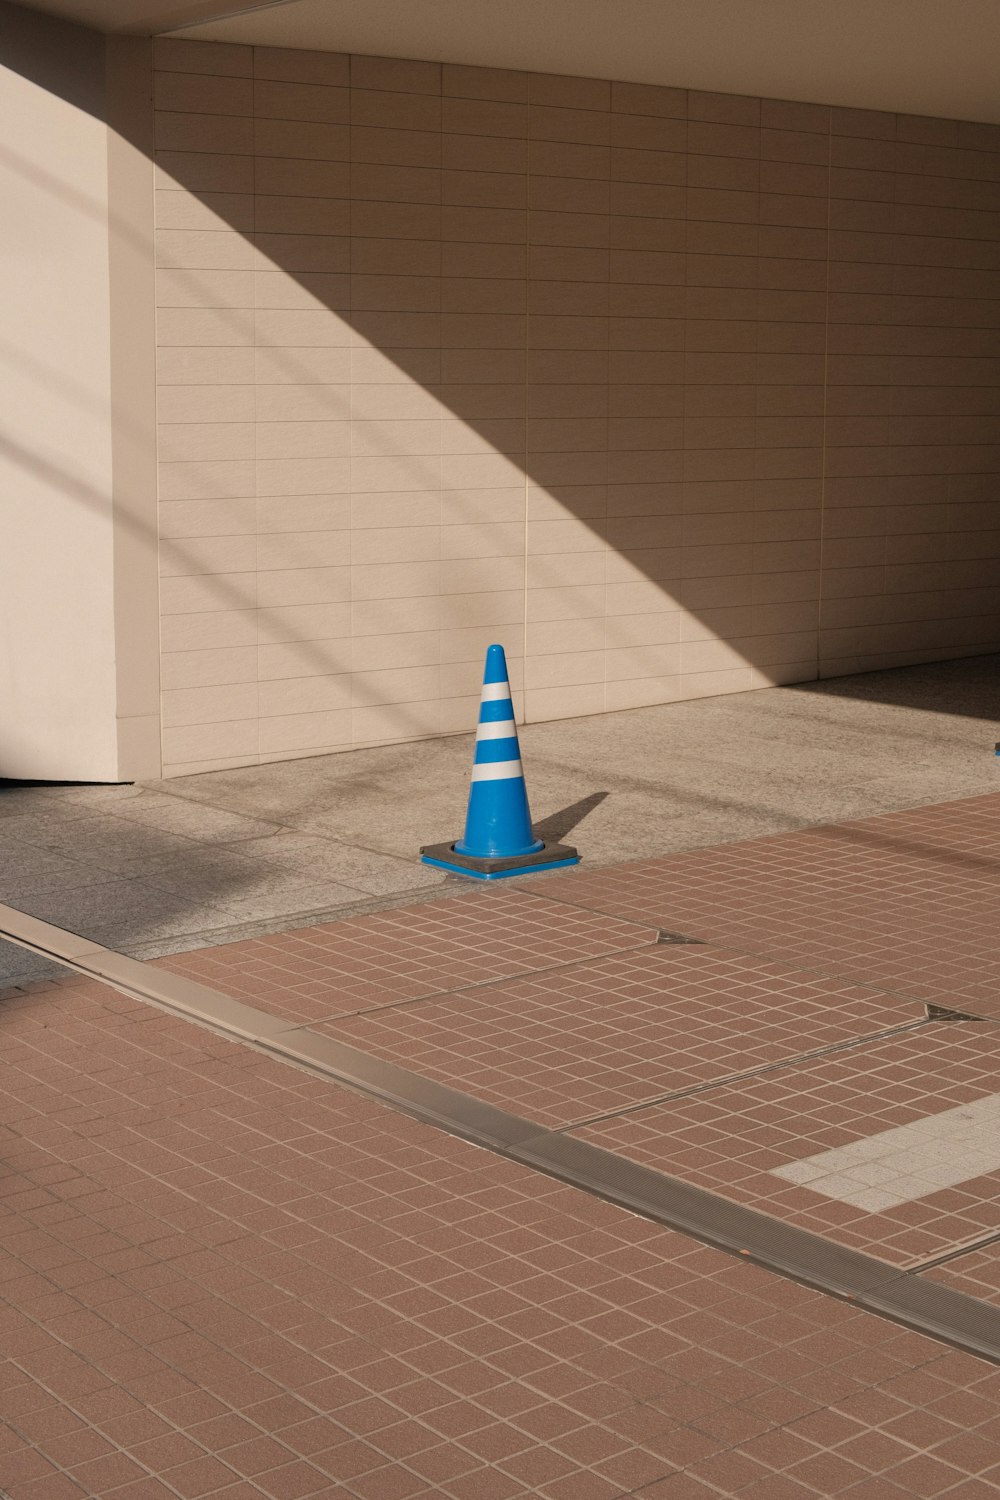 a blue cone on a brick floor